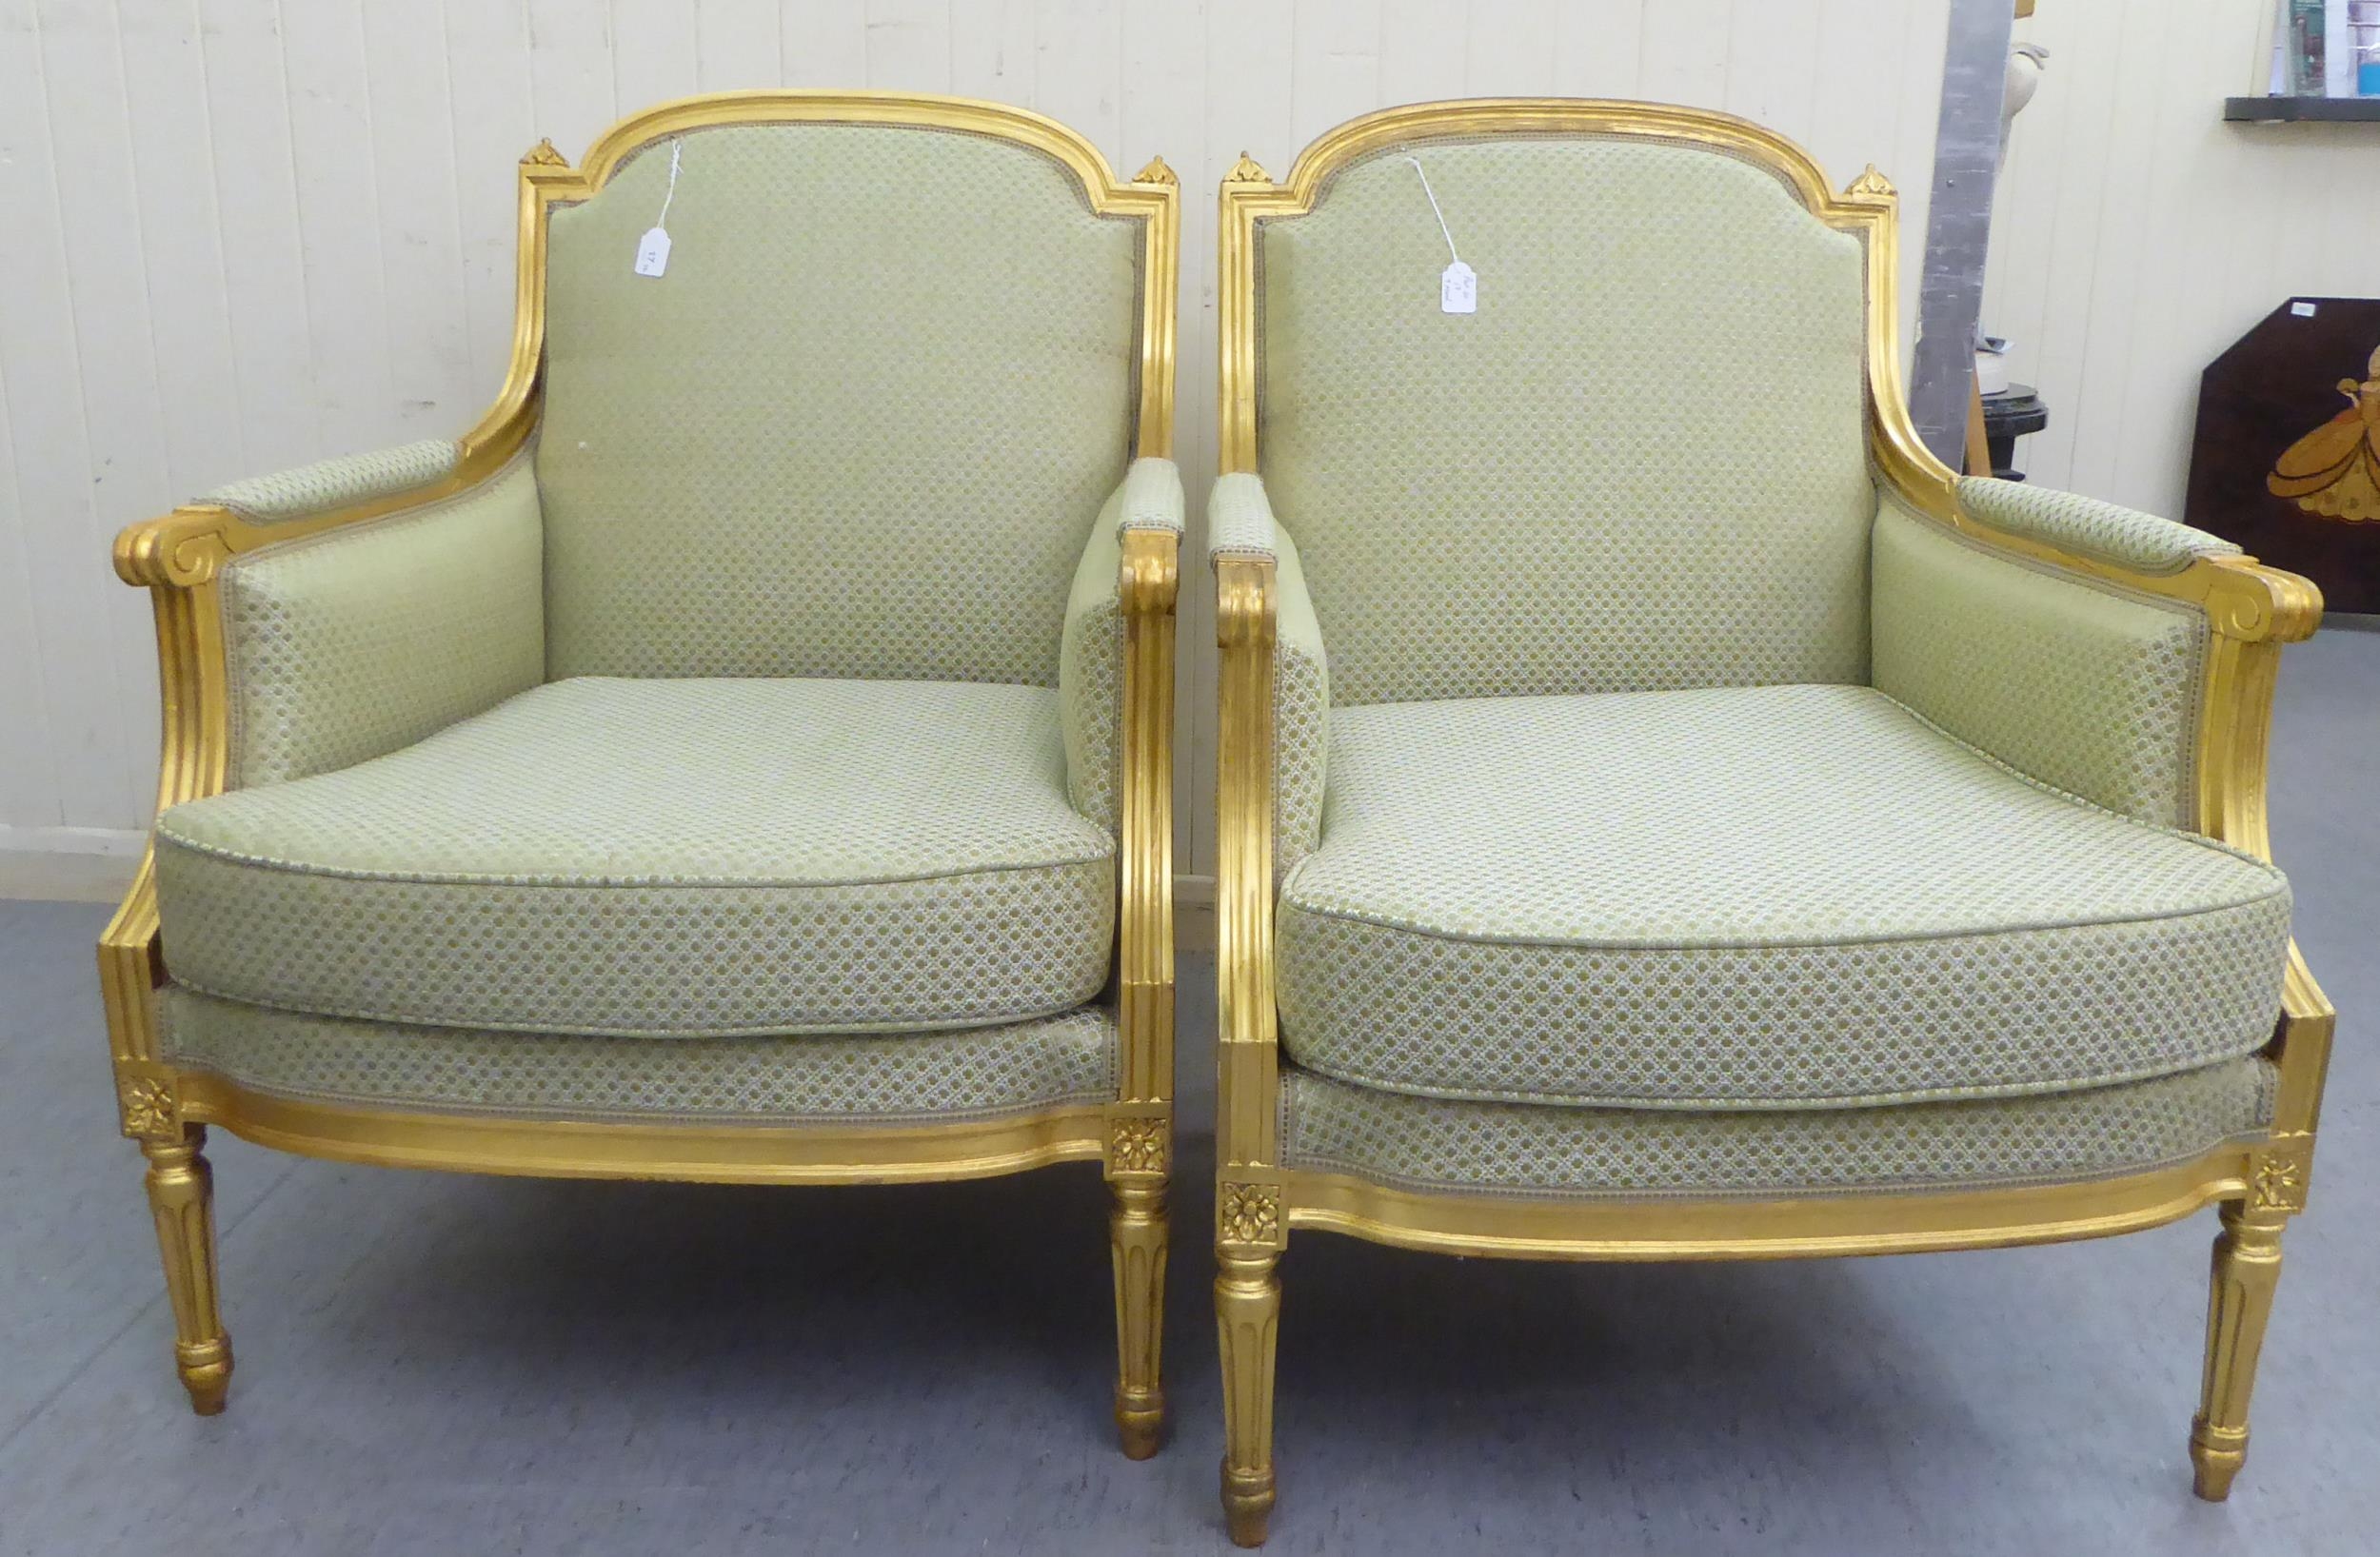 A Pair Of Louis XVI Style Antique Finished Gilded Show Wood Framed Enclosed Salon Chairs, - Image 4 of 5